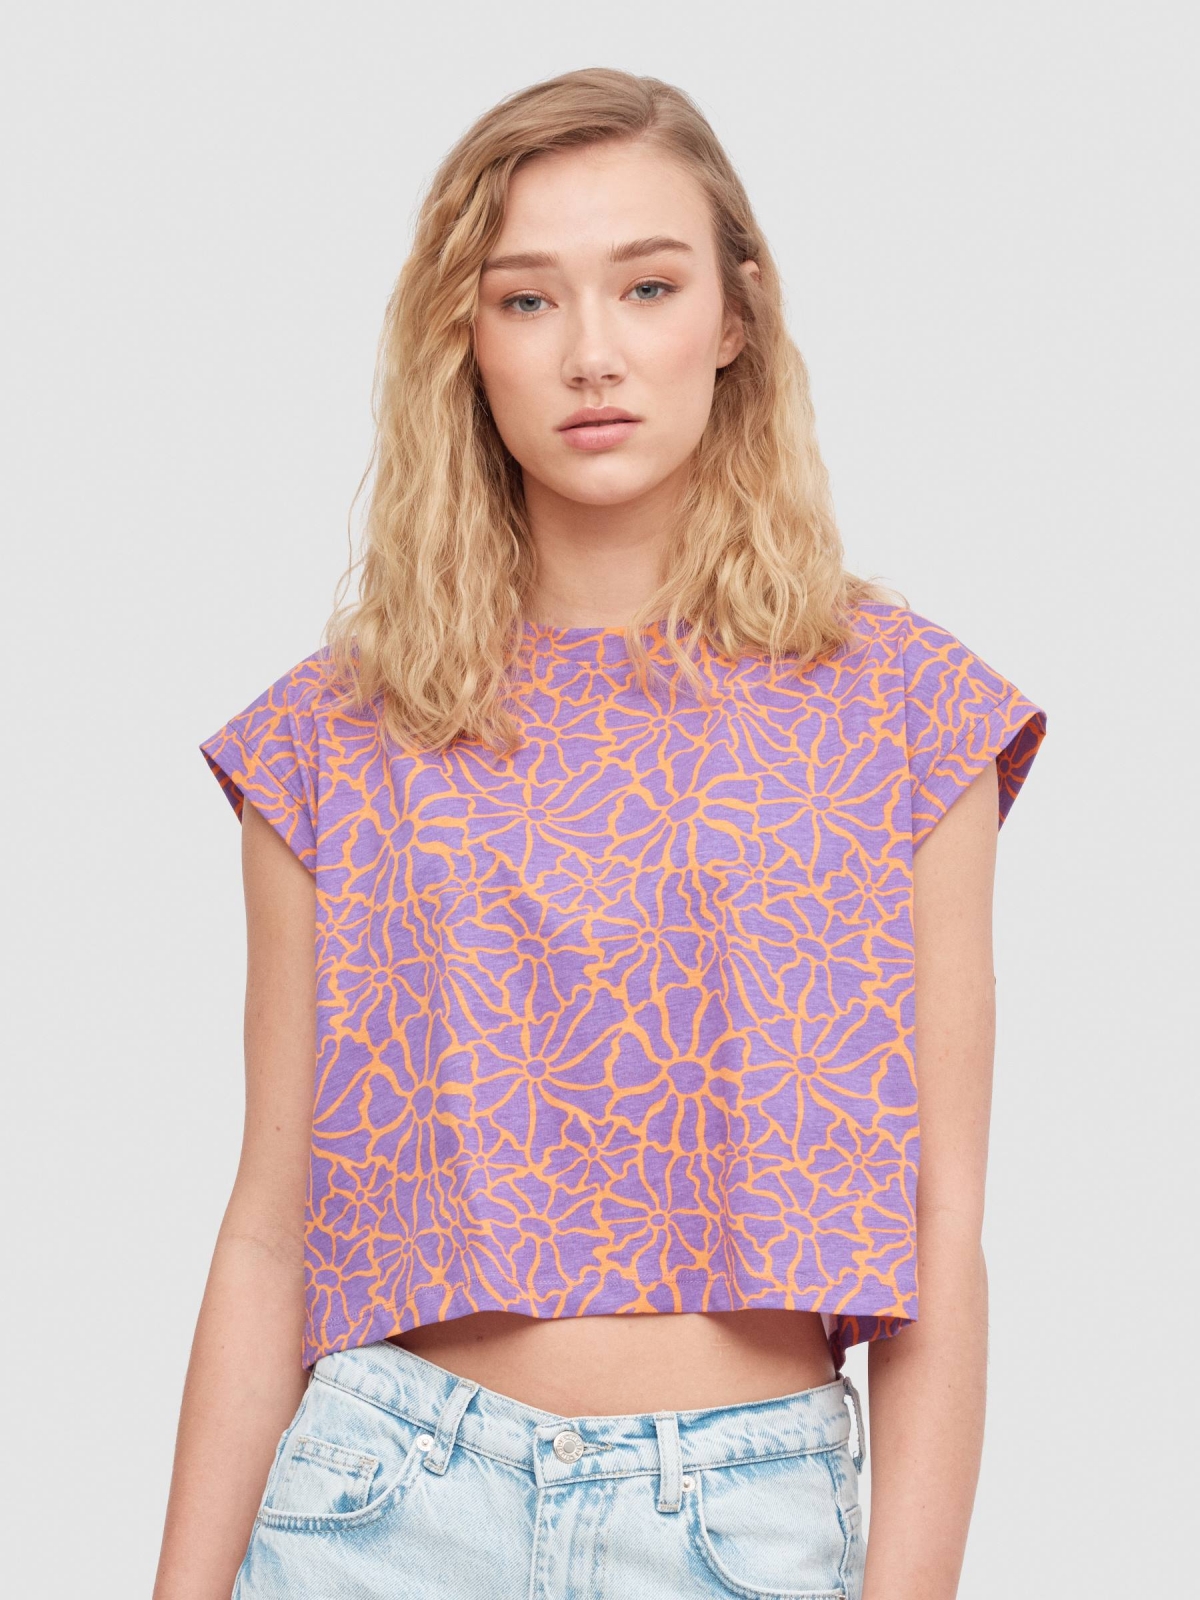 Flowers crop top lilac middle front view